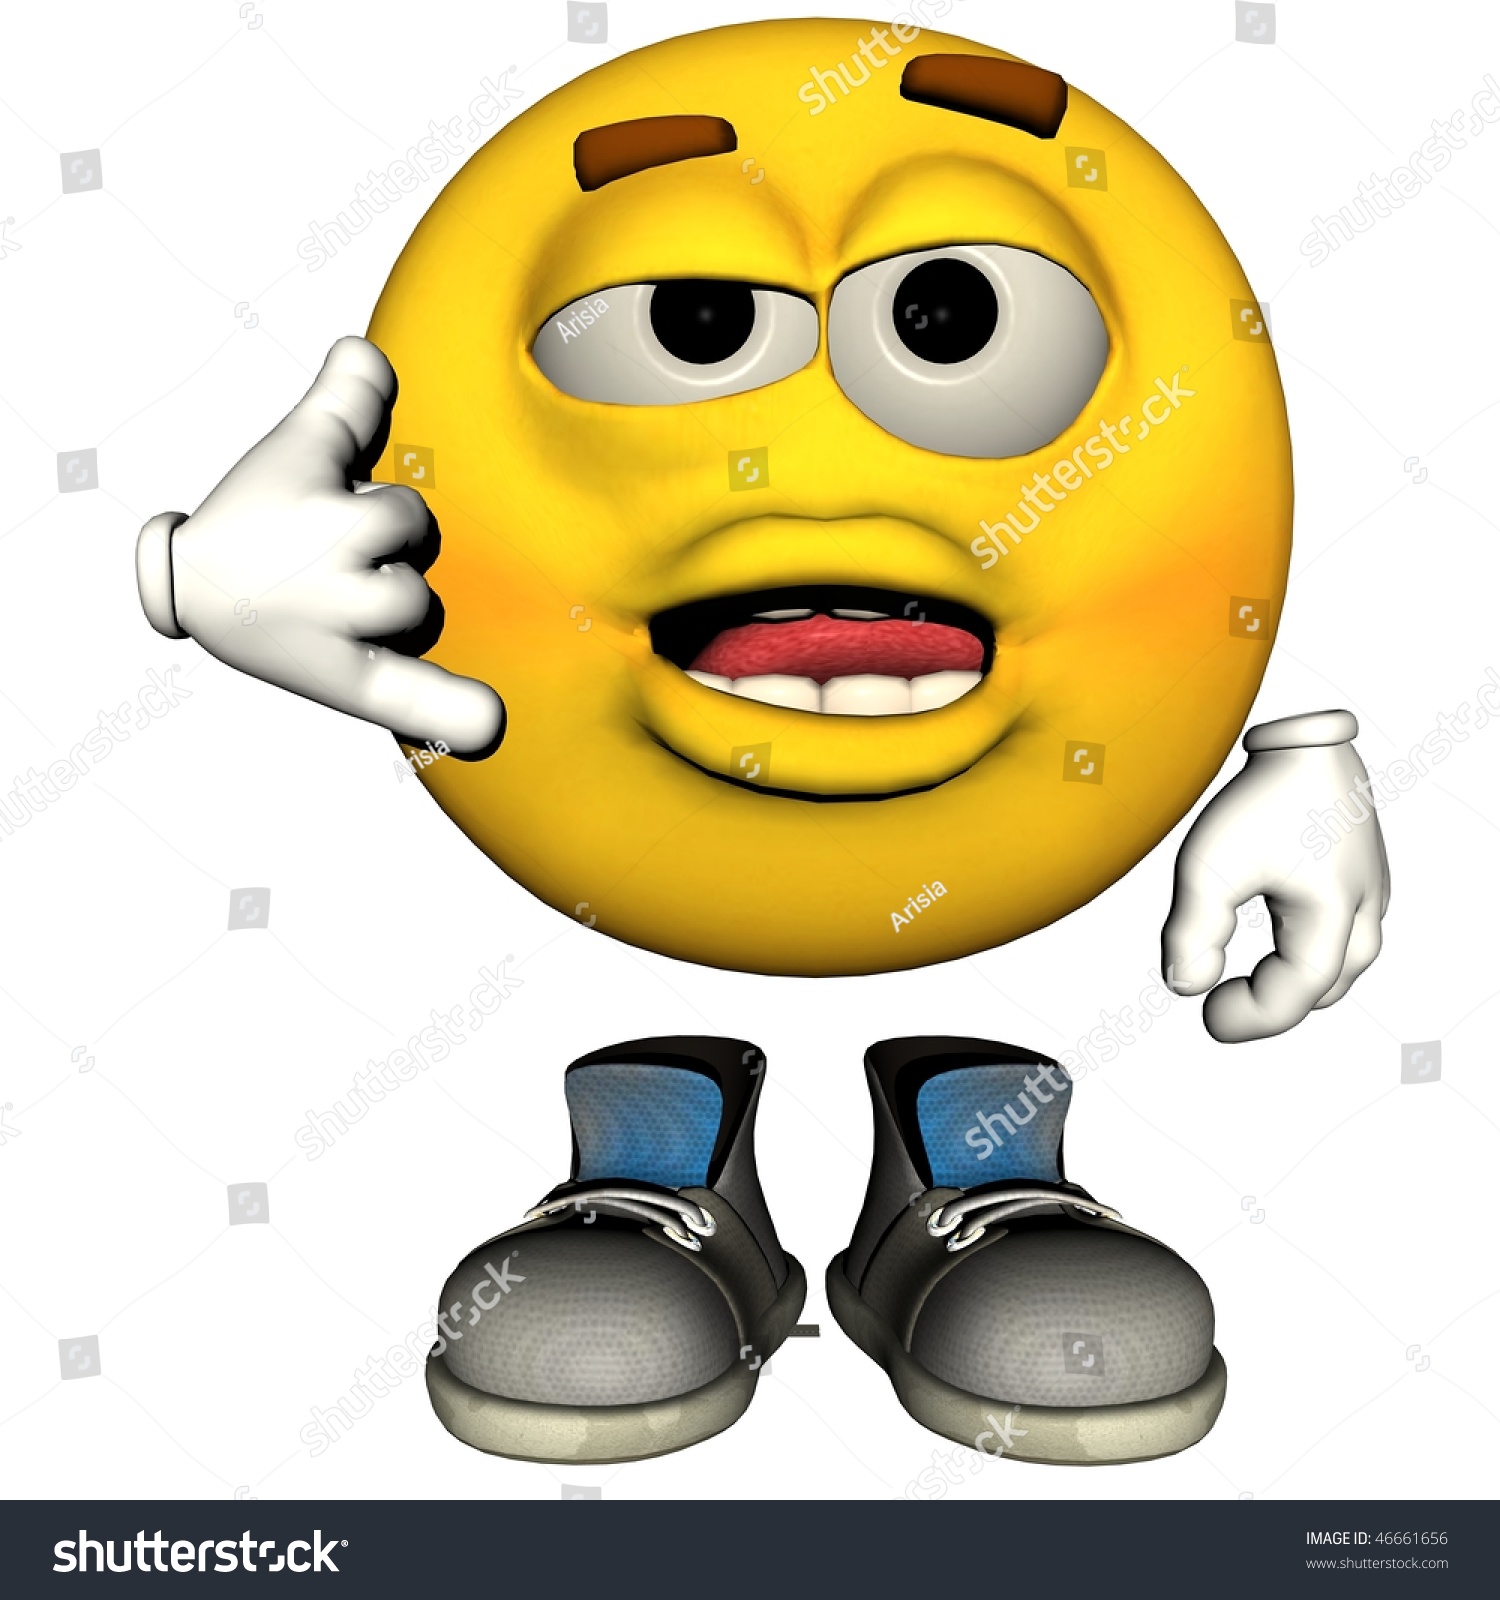 Single 3d Emoticon Isolated On White Stock Photo 46661656 : Shutterstock